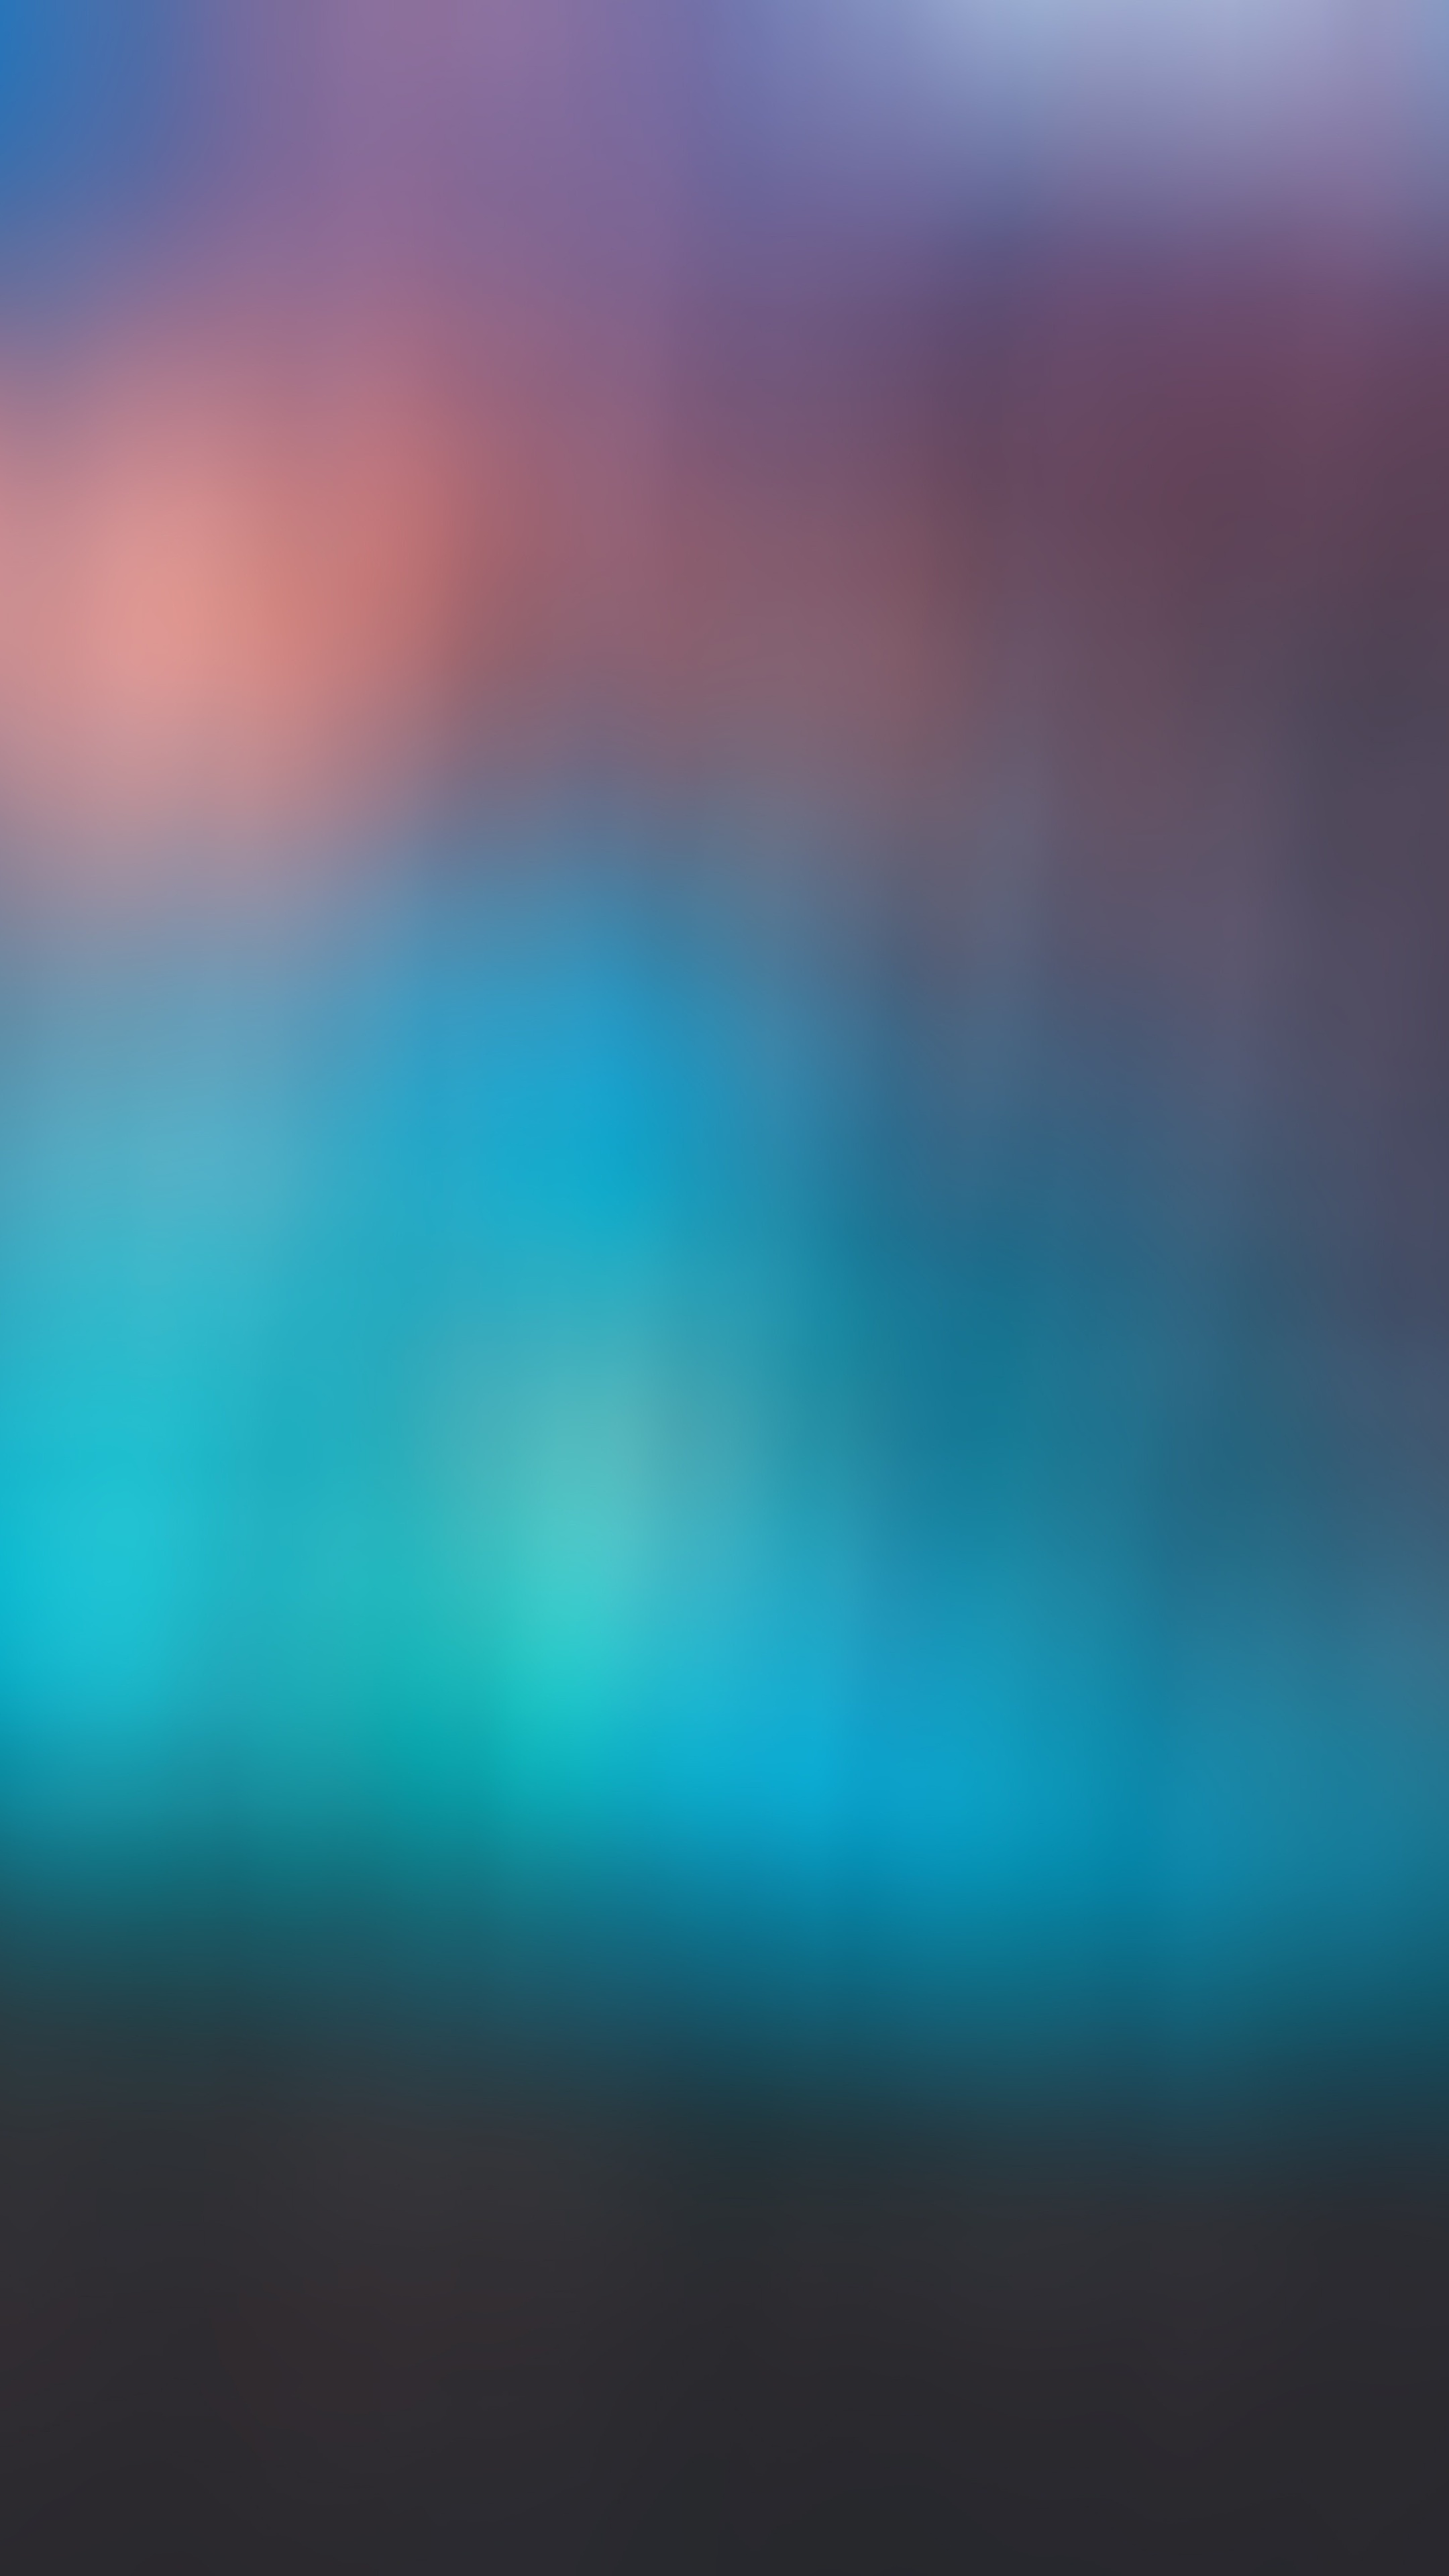 Blur blue gradient cool background, Sony Xperia, HD 4K wallpapers, Serene atmosphere, 2160x3840 4K Phone